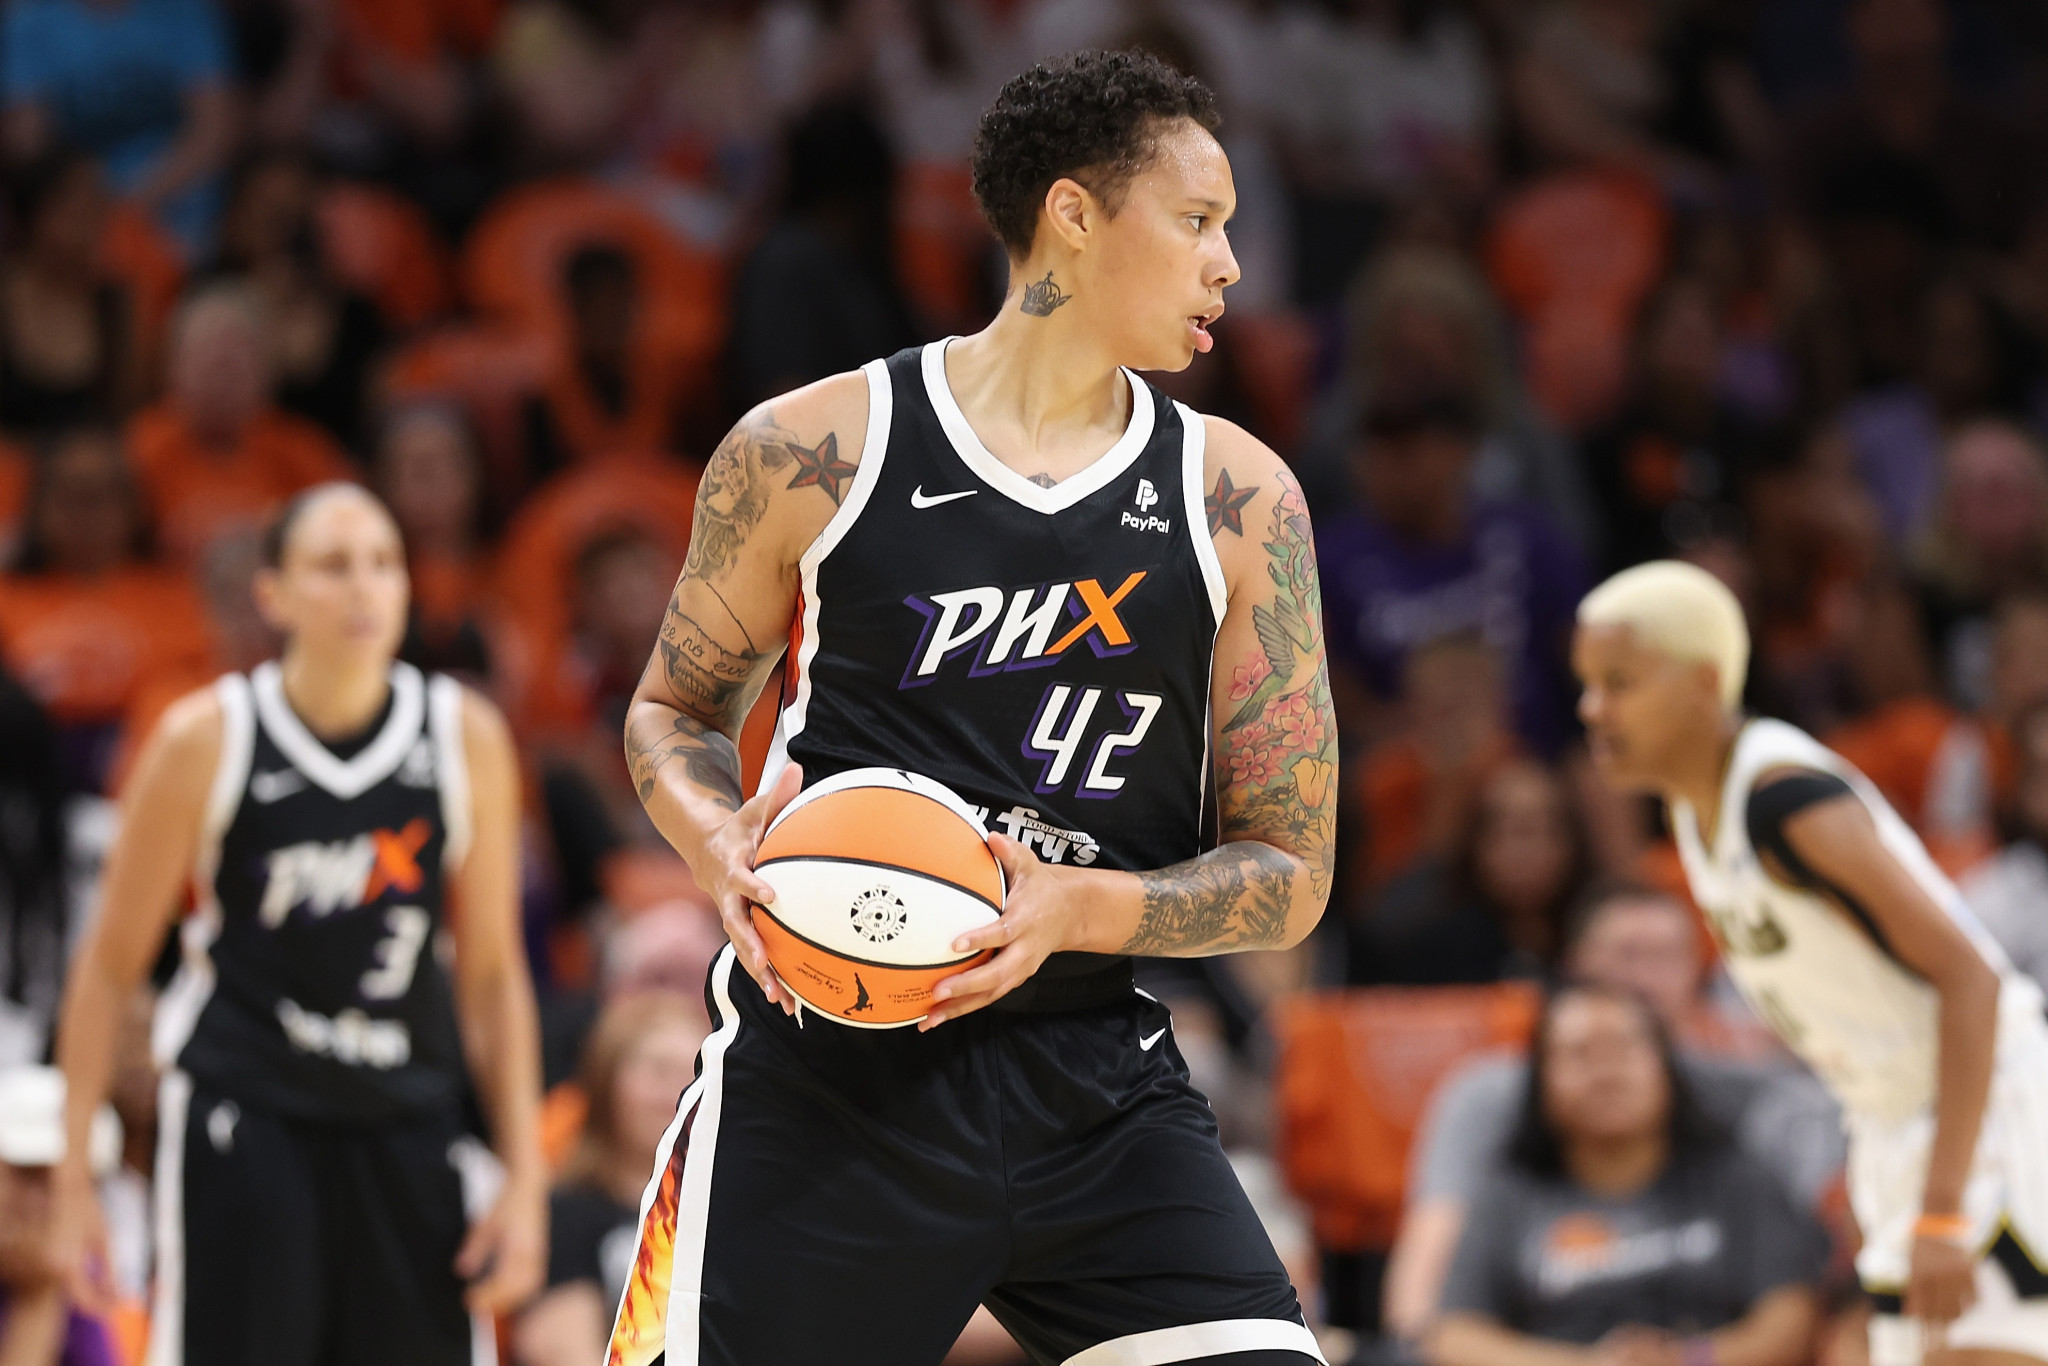 Phoenix Mercury to adjust travel arrangements after Griner confronted by "provocateur" at airport